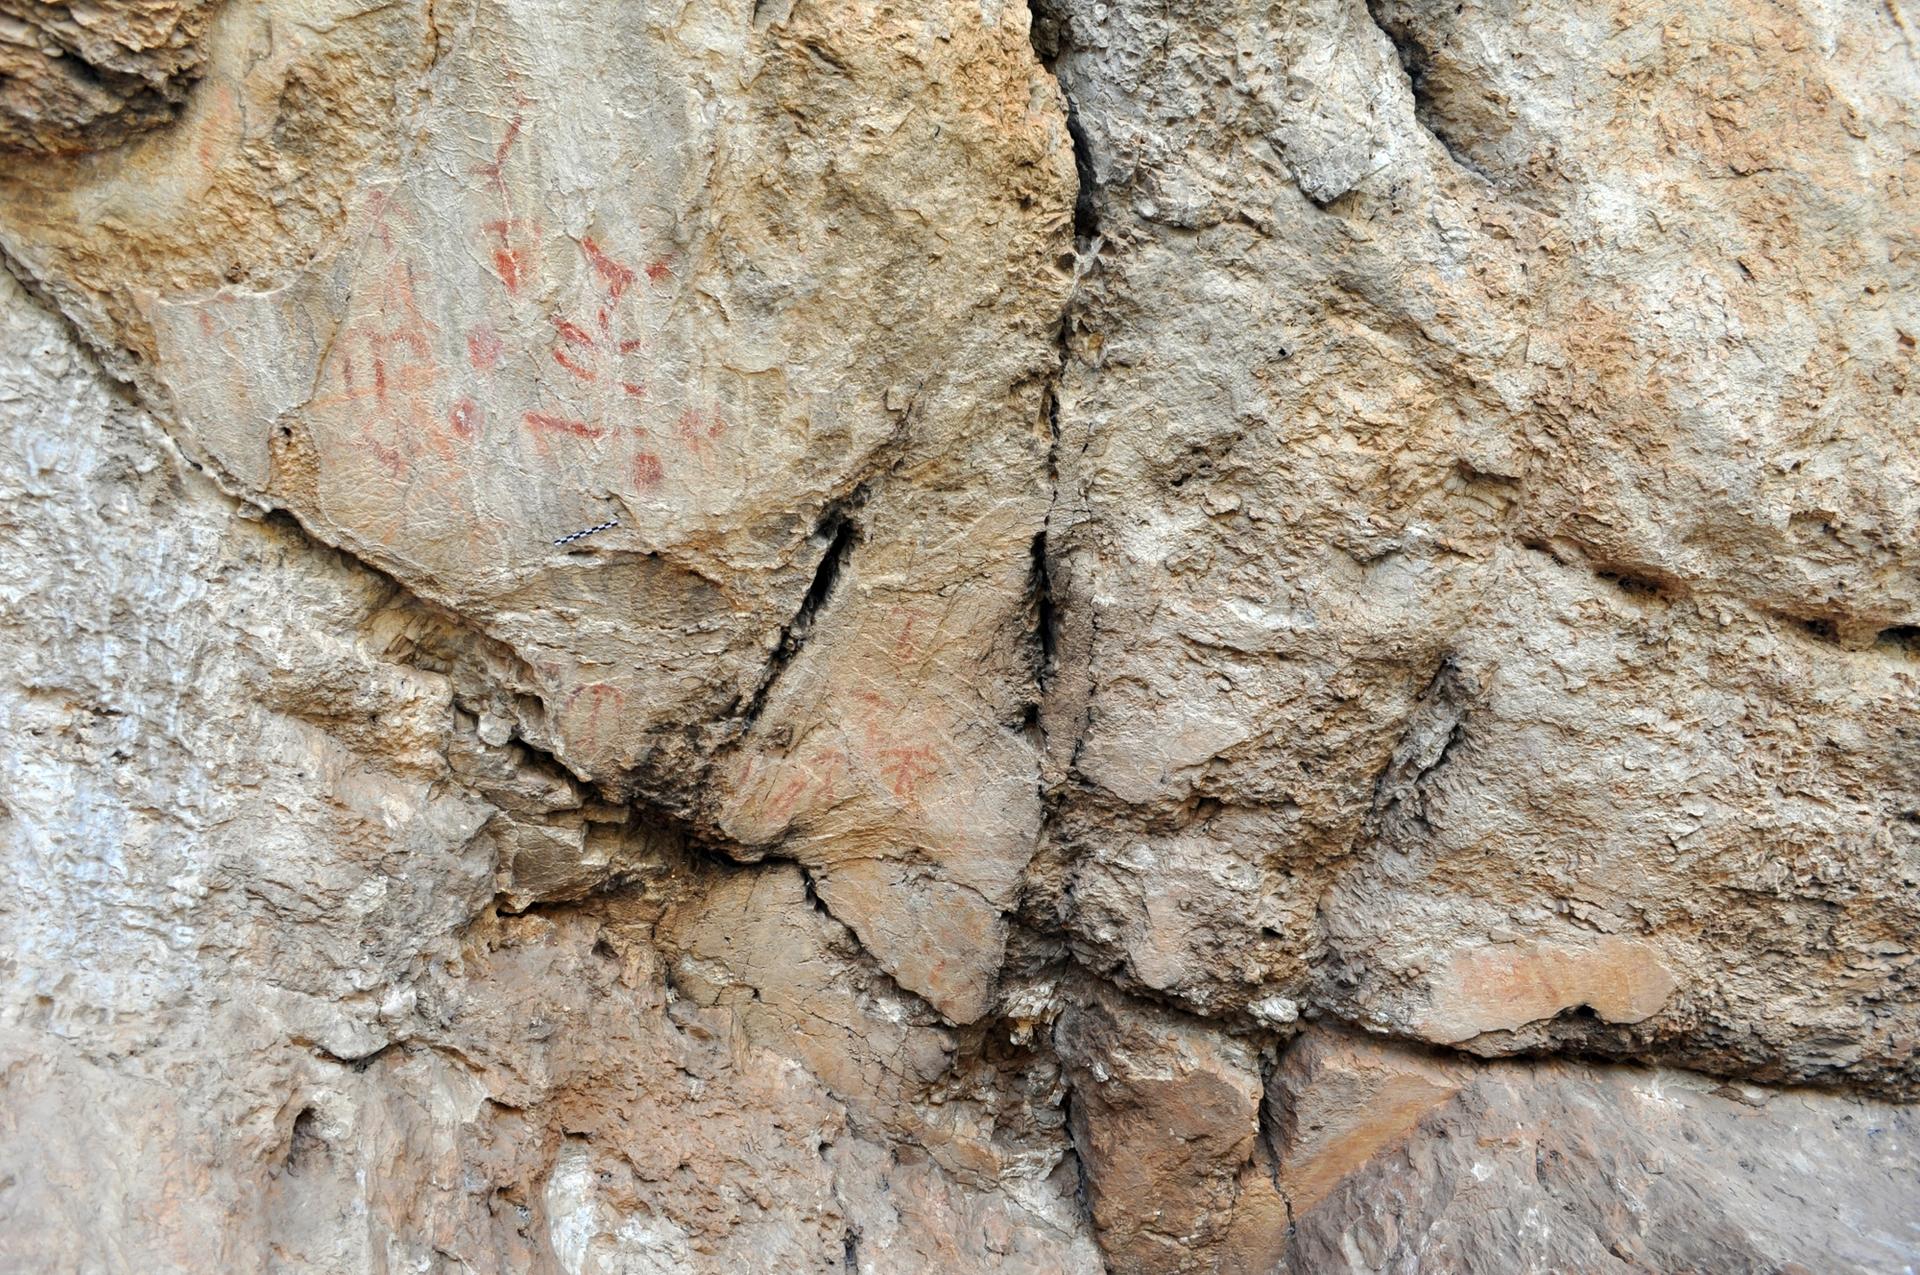 A Neolithic schematic art painting in the Los Machos rockshelter Photo: Francisco Martínez-Sevilla